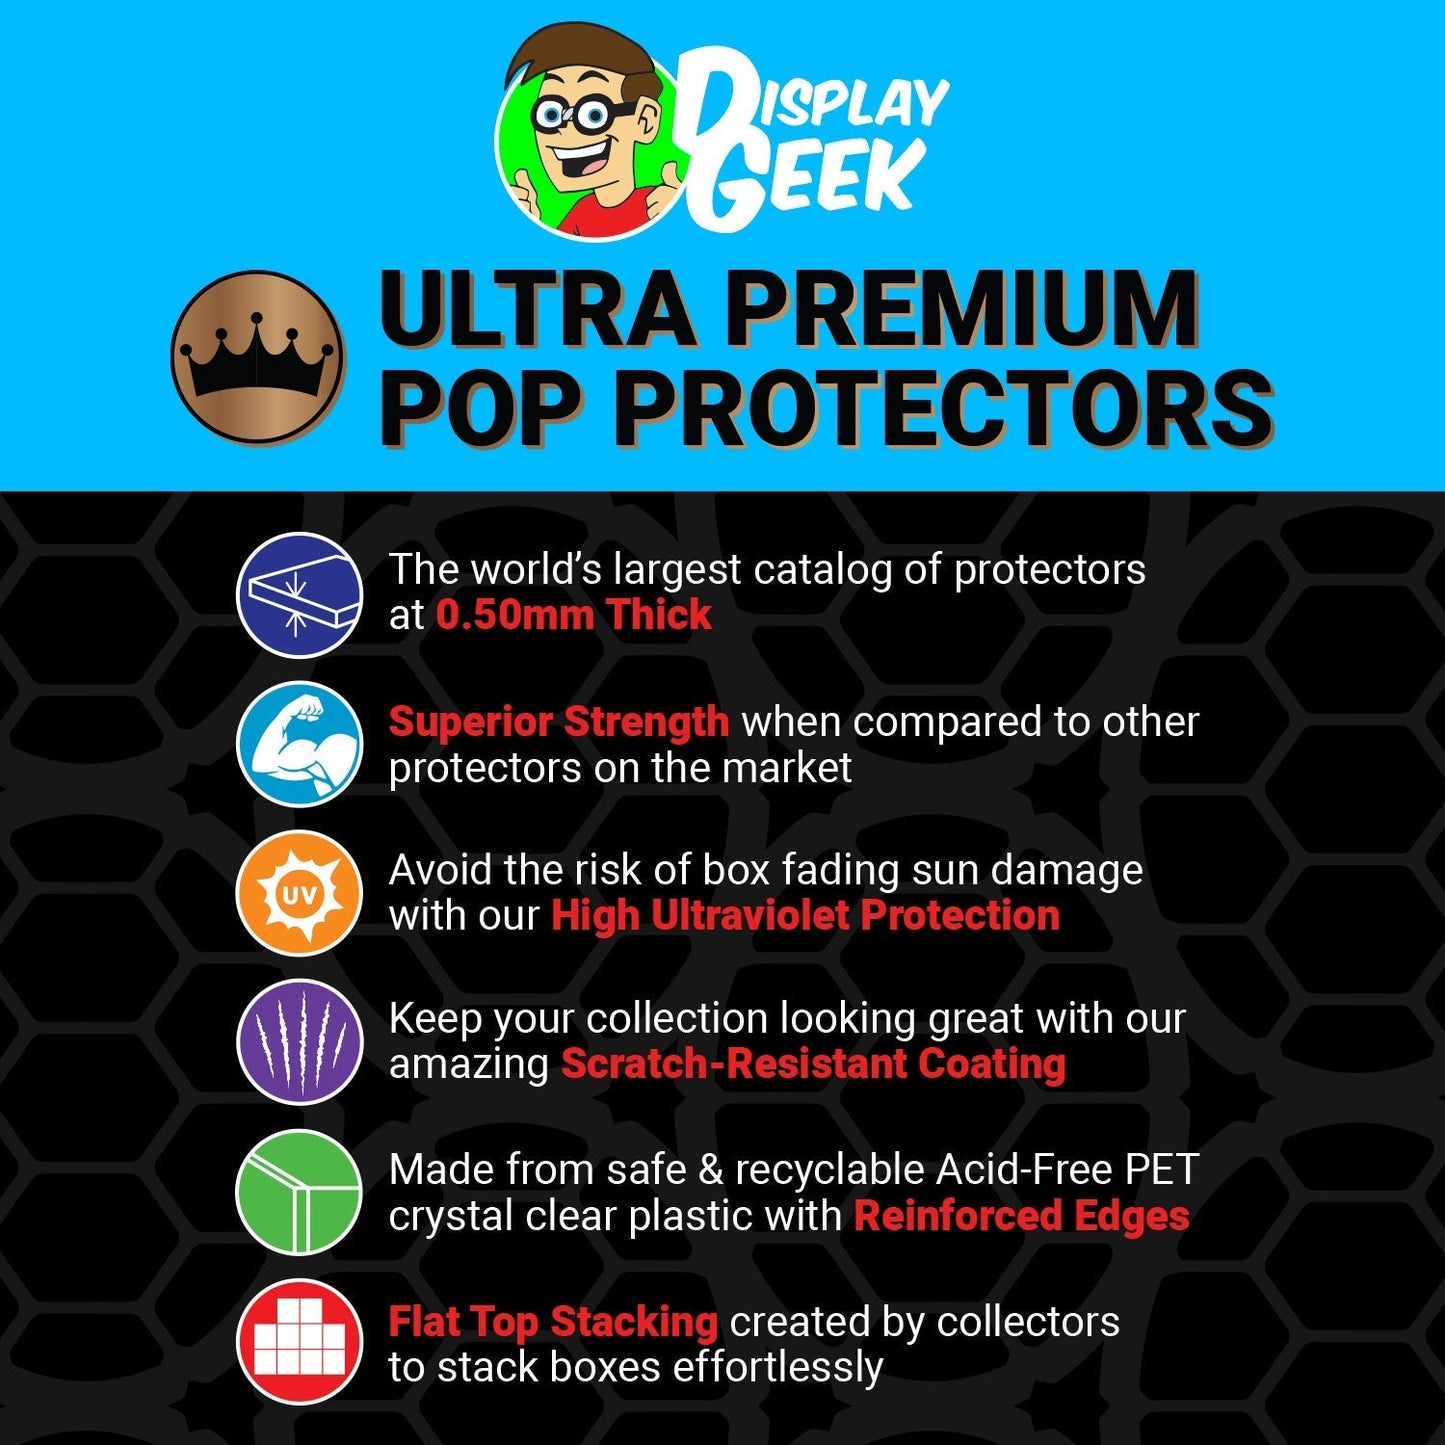 Pop Protector for 10 inch Infinity Killmonger Blacklight #1058 Jumbo Funko Pop - PPG Pop Protector Guide Search Created by Display Geek